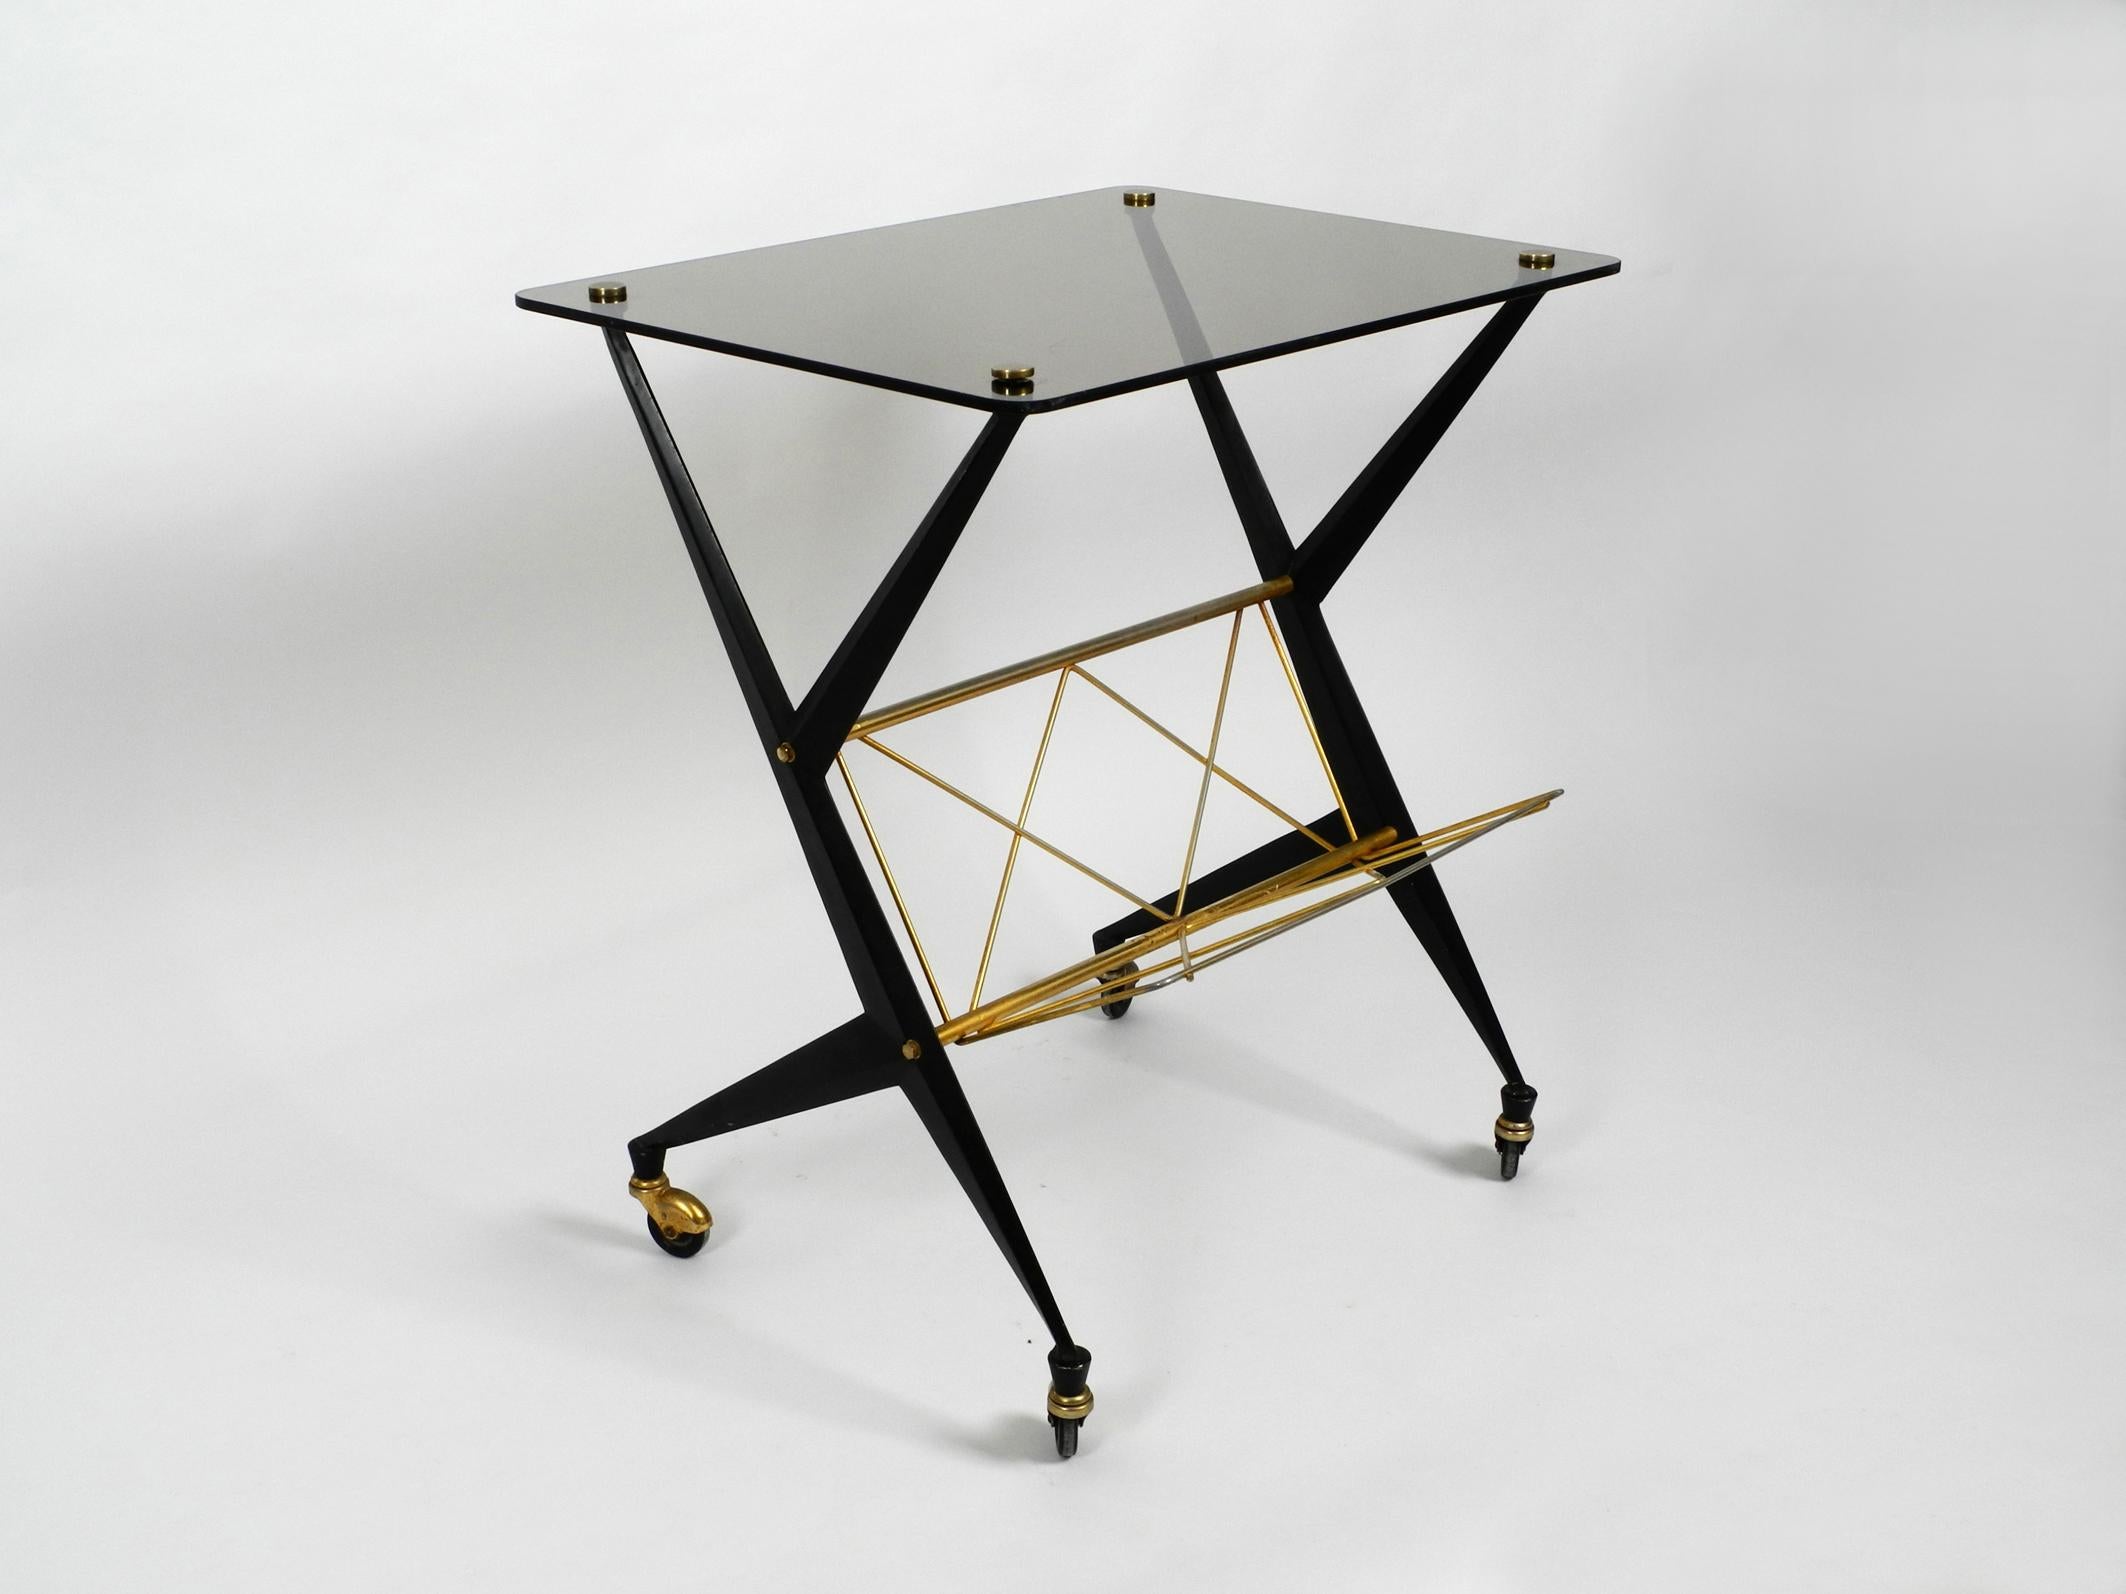 Very rare Italian midcentury side table with a newspaper shelf.
Designed by Angelo Ostuni for Frangi Milano. Made in Italy.
Great uncommon 1950s Italian design.
Because of the height, it can also be used as a console table or bar trolley.
Black